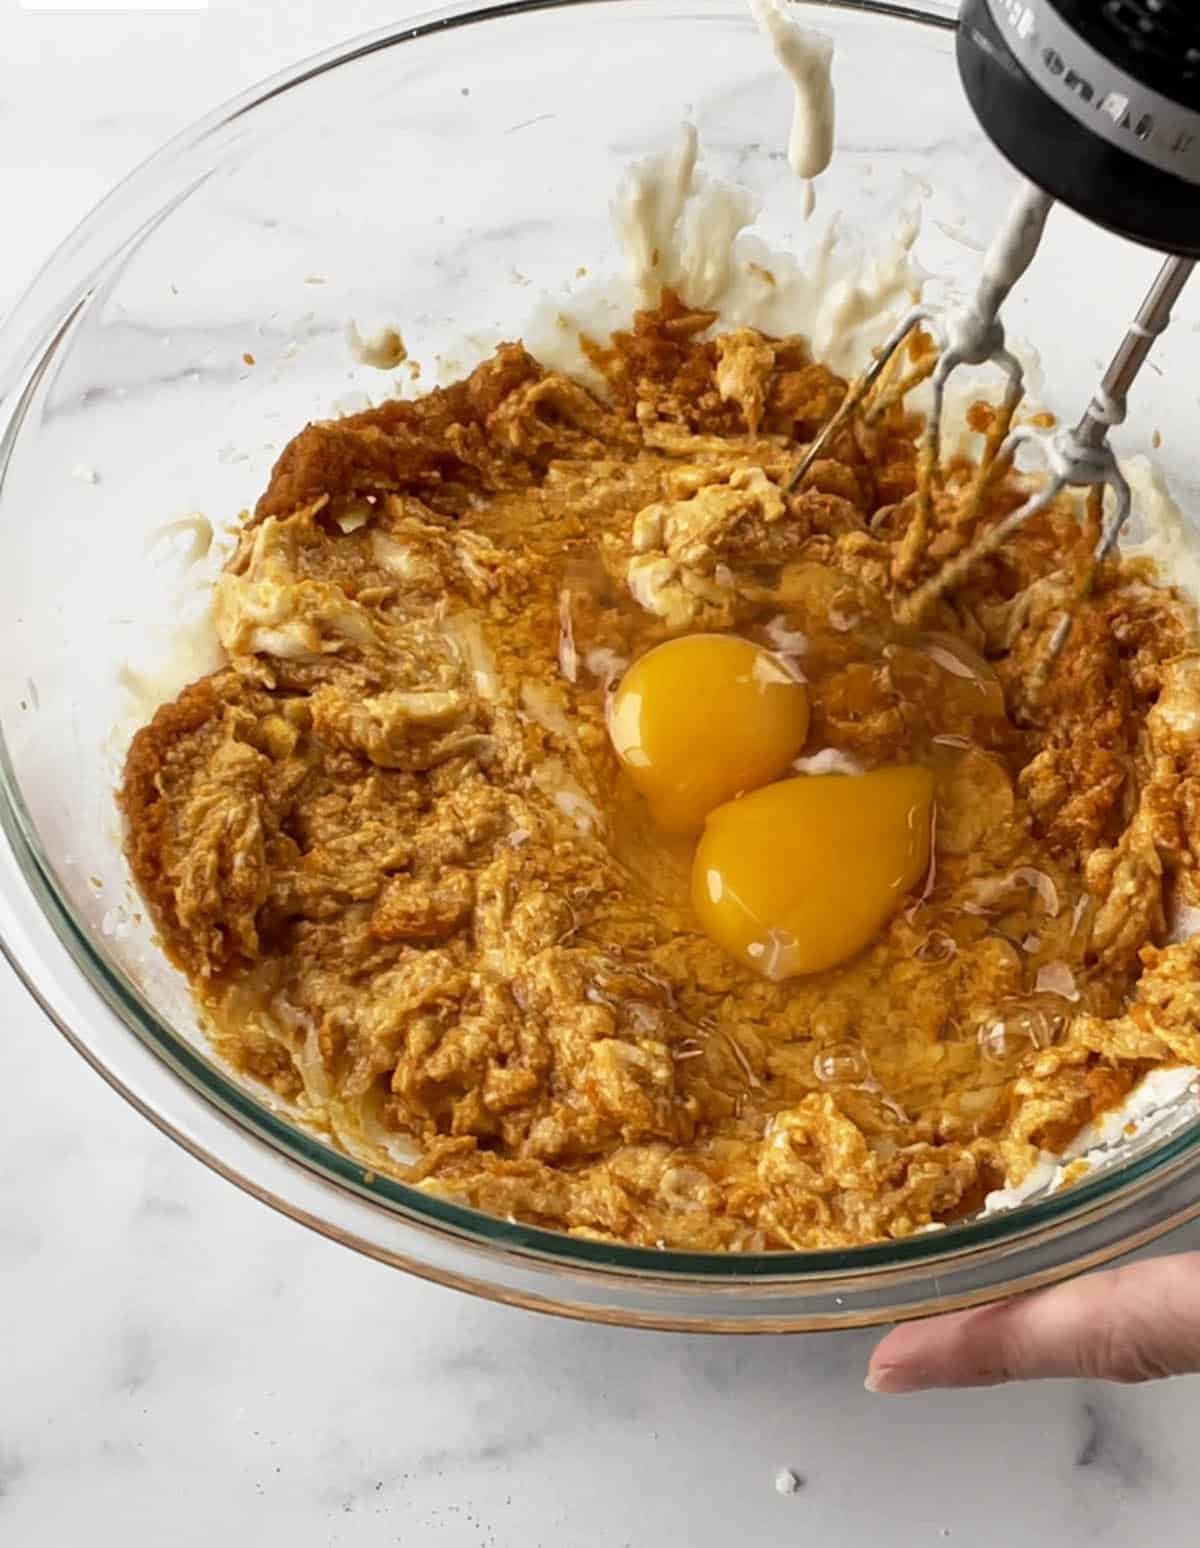 A glass bowl with a pumpkin batter and two eggs being whisked in.